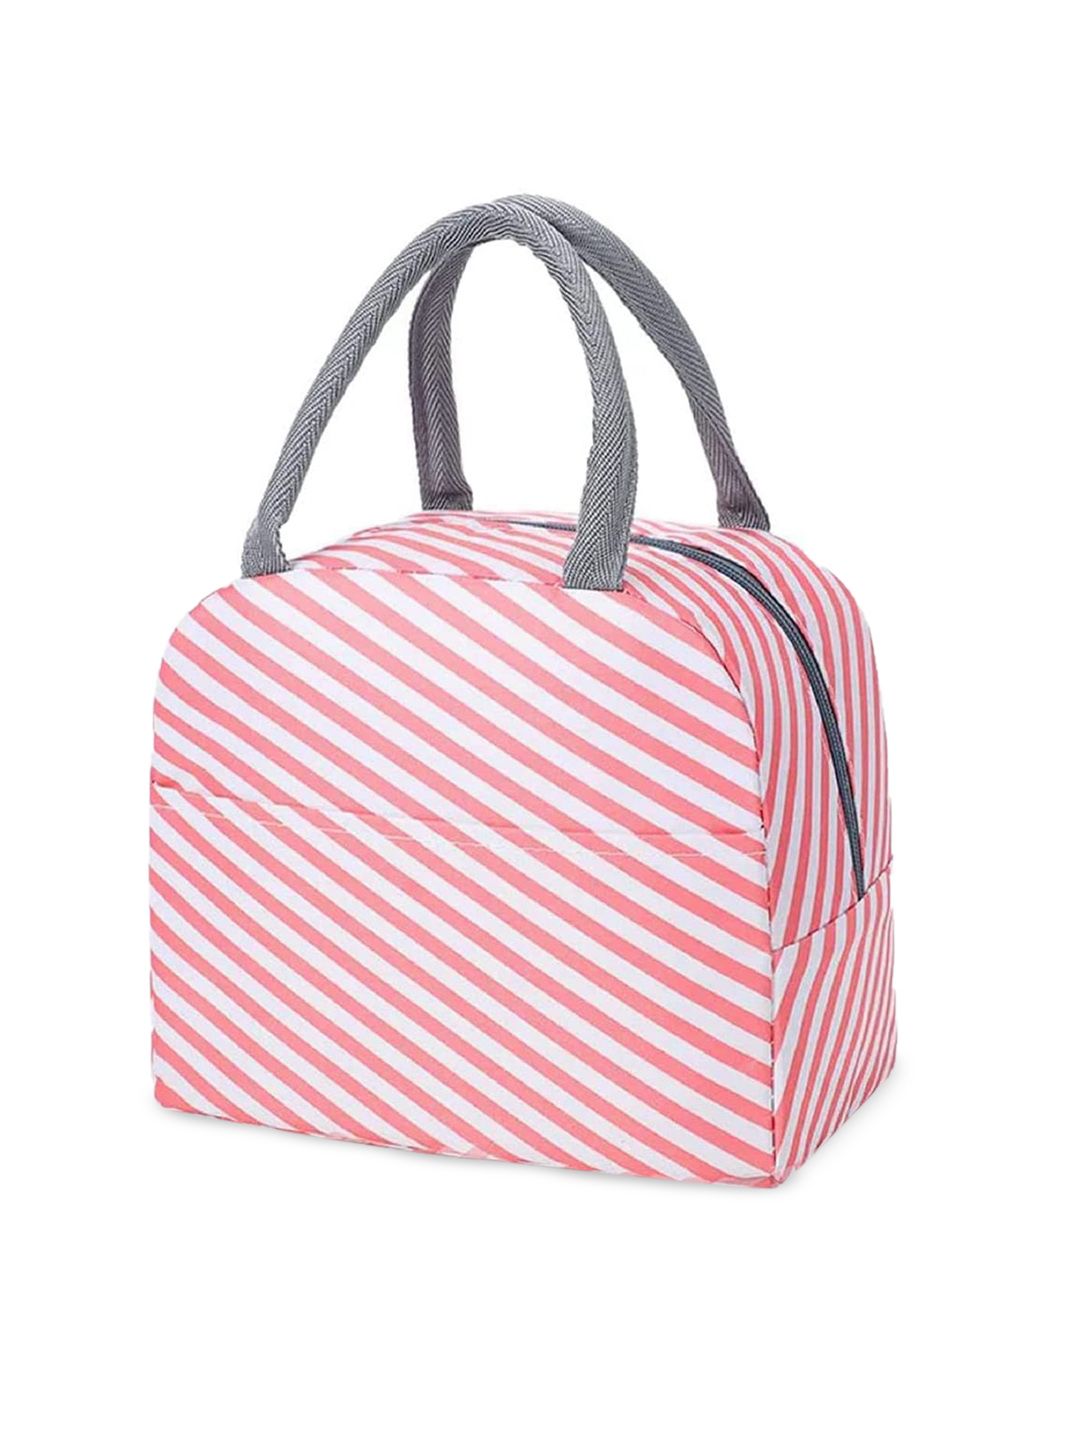 HOUSE OF QUIRK Unisex Pink & White Printed Lunch Bag Price in India